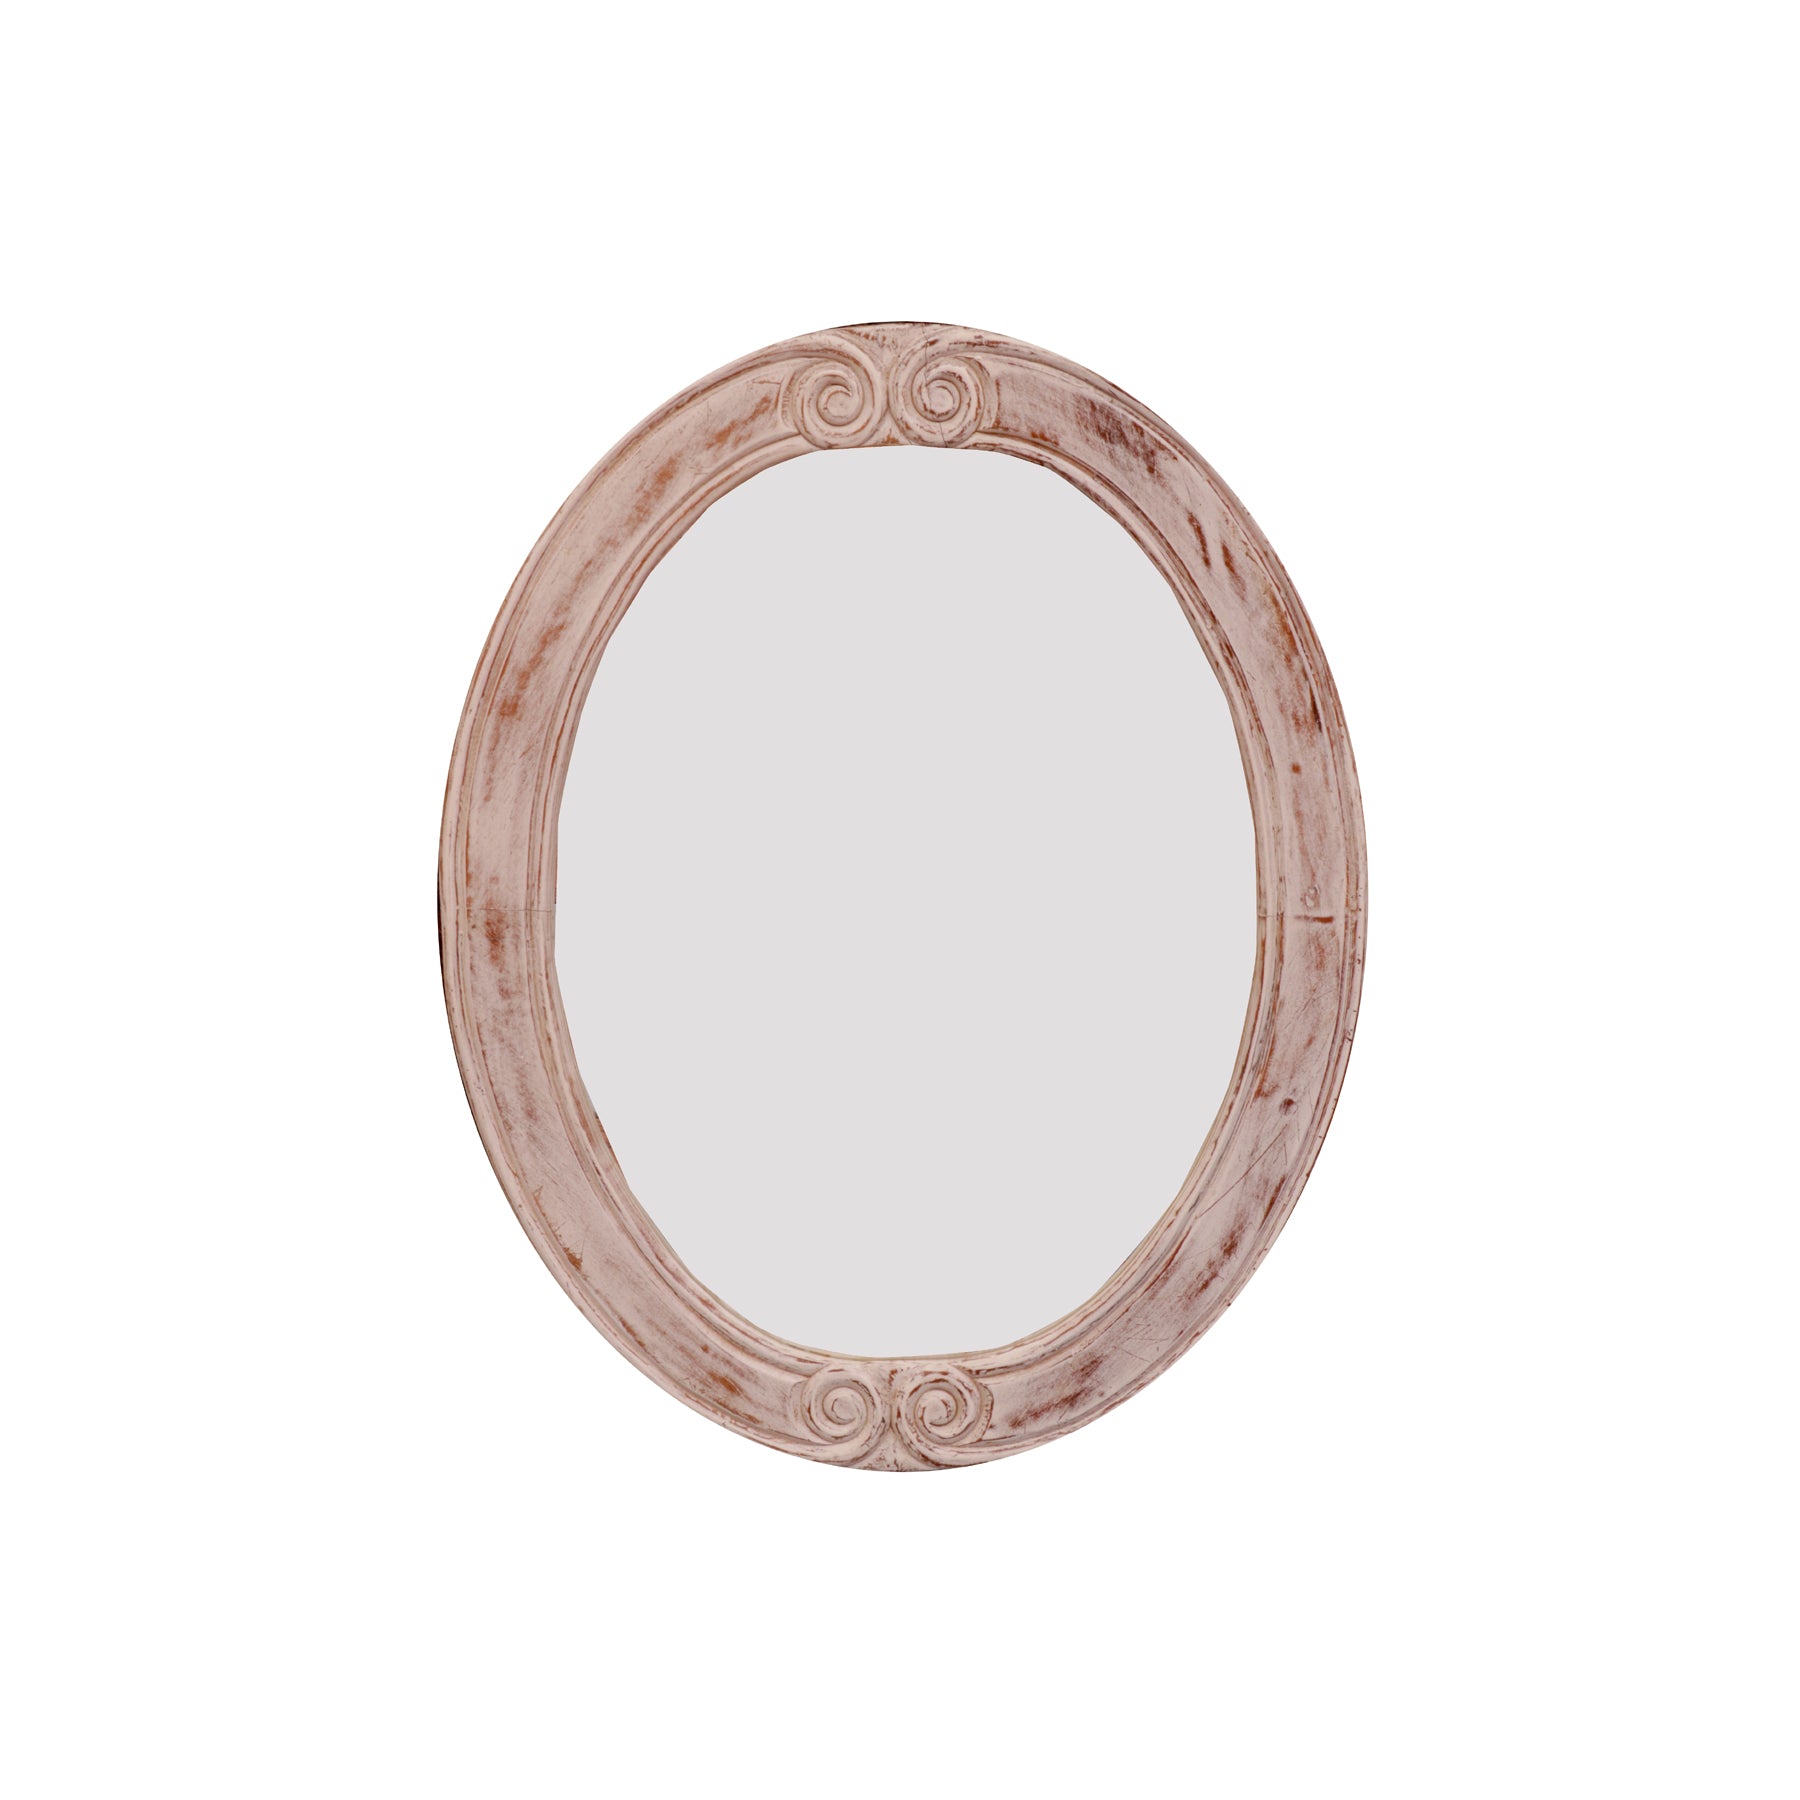 Oval Rustic Hanging Mirror Mirror